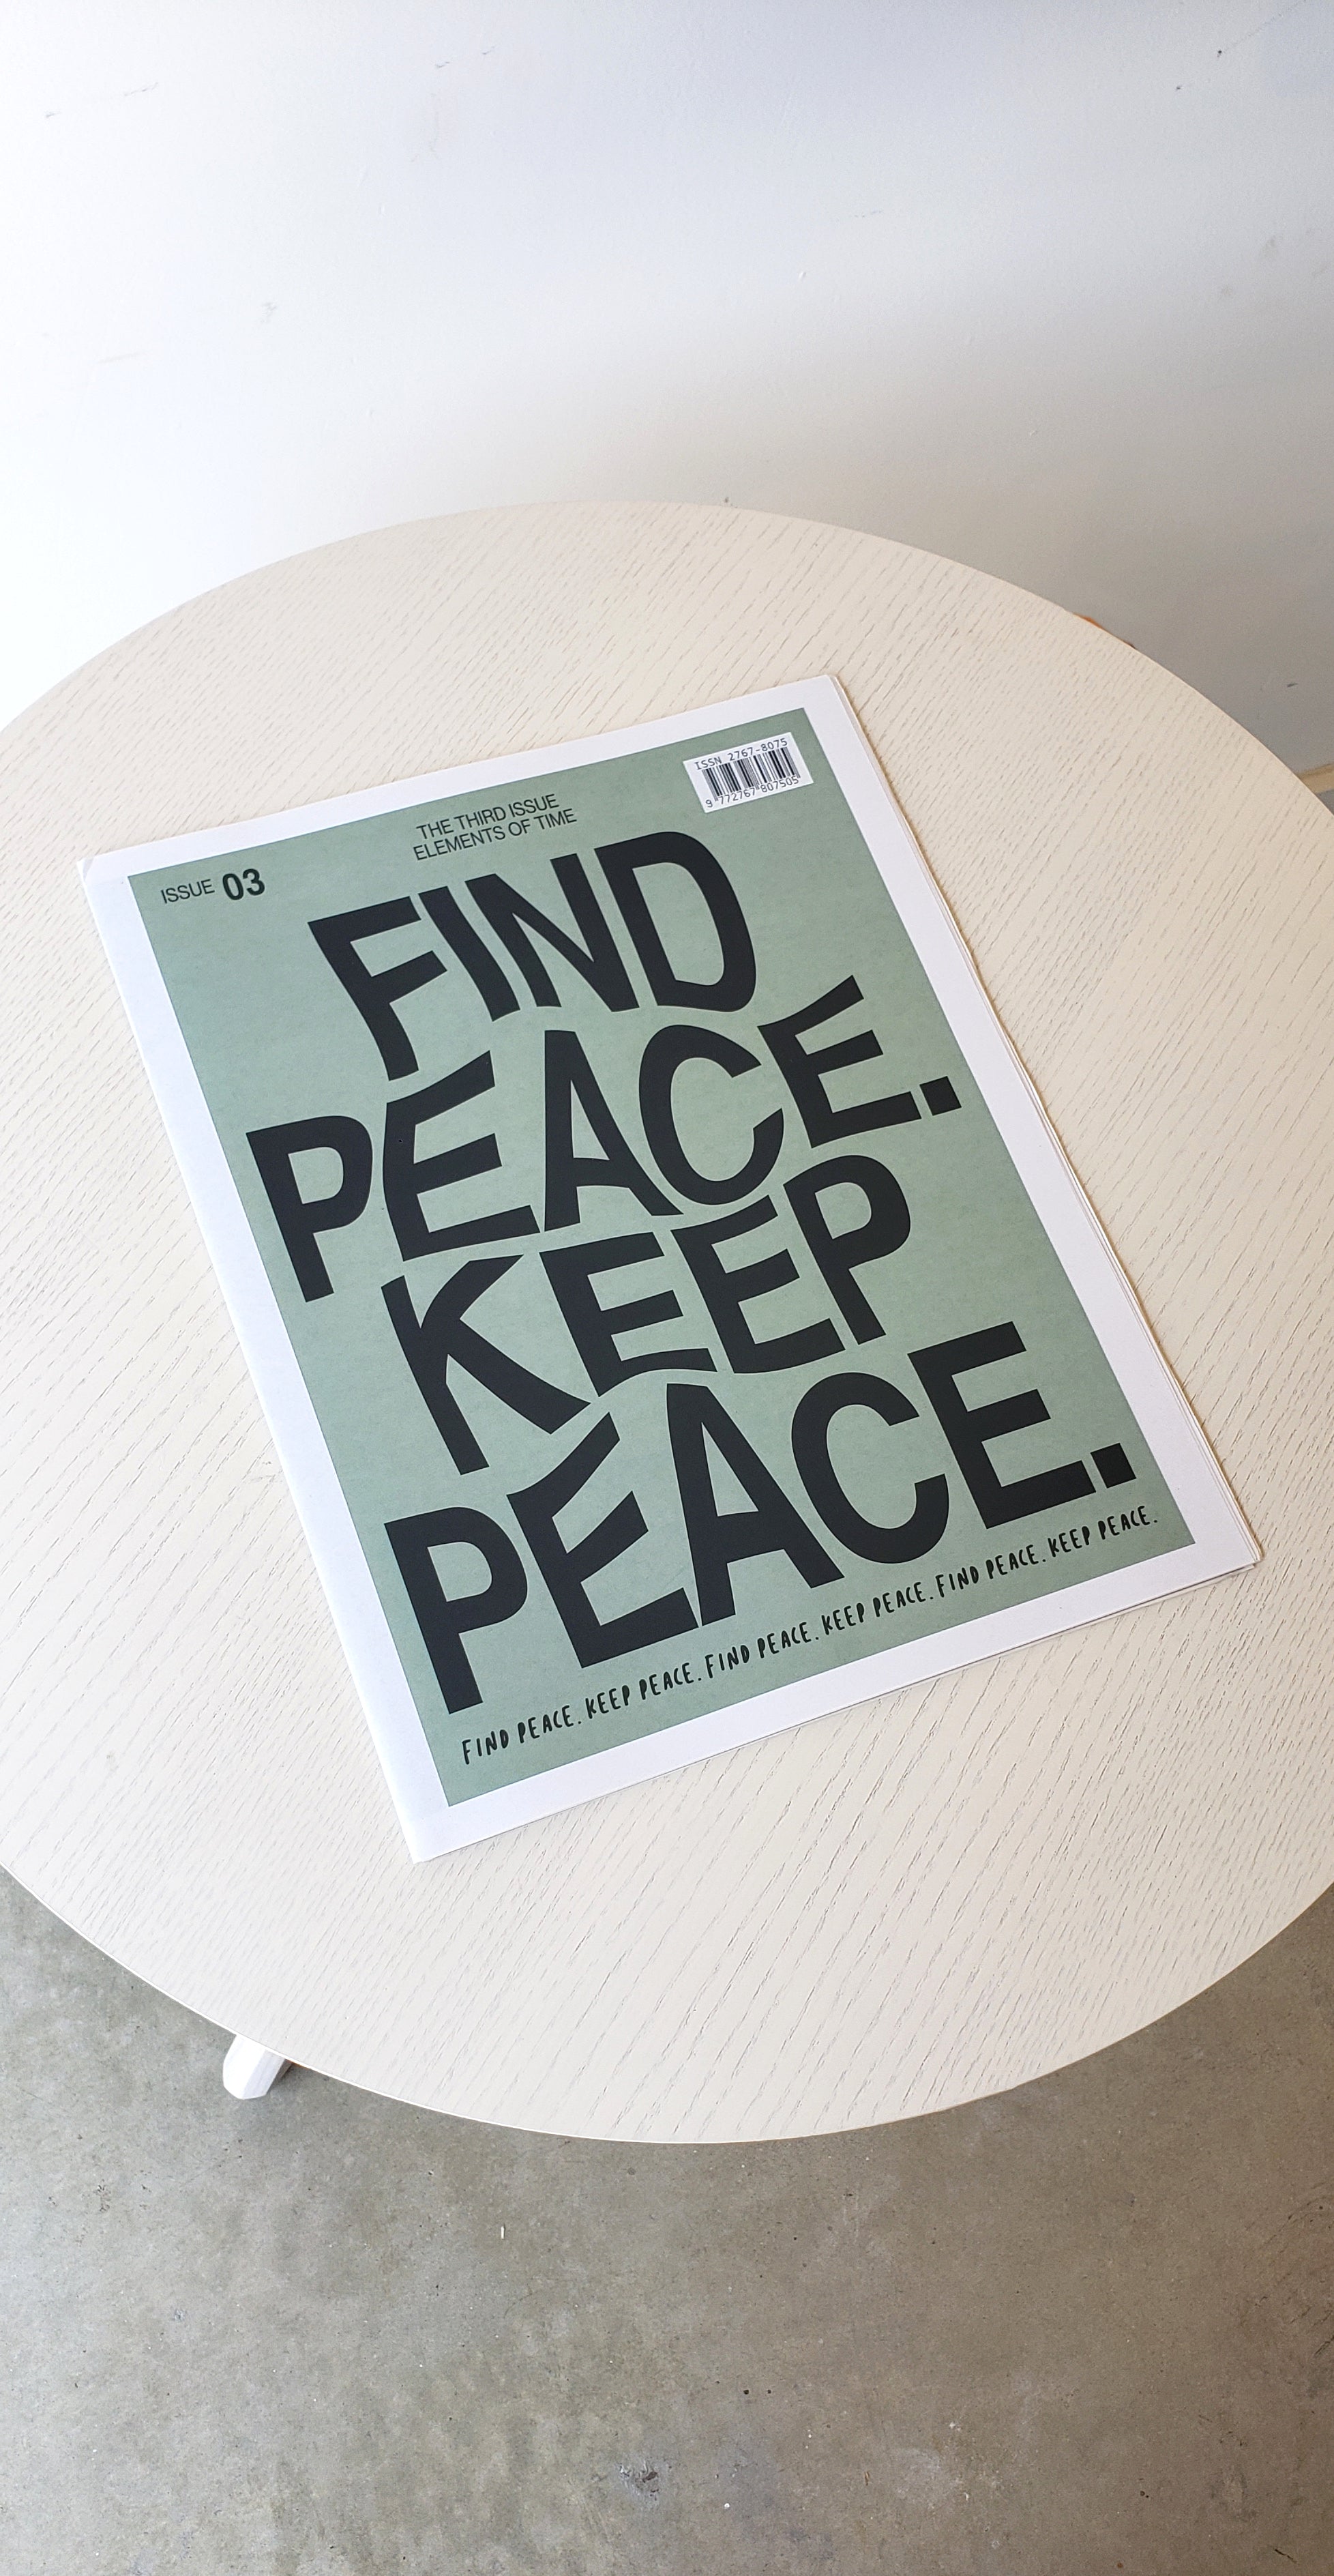 "find peace. keep peace." - the fourth issue